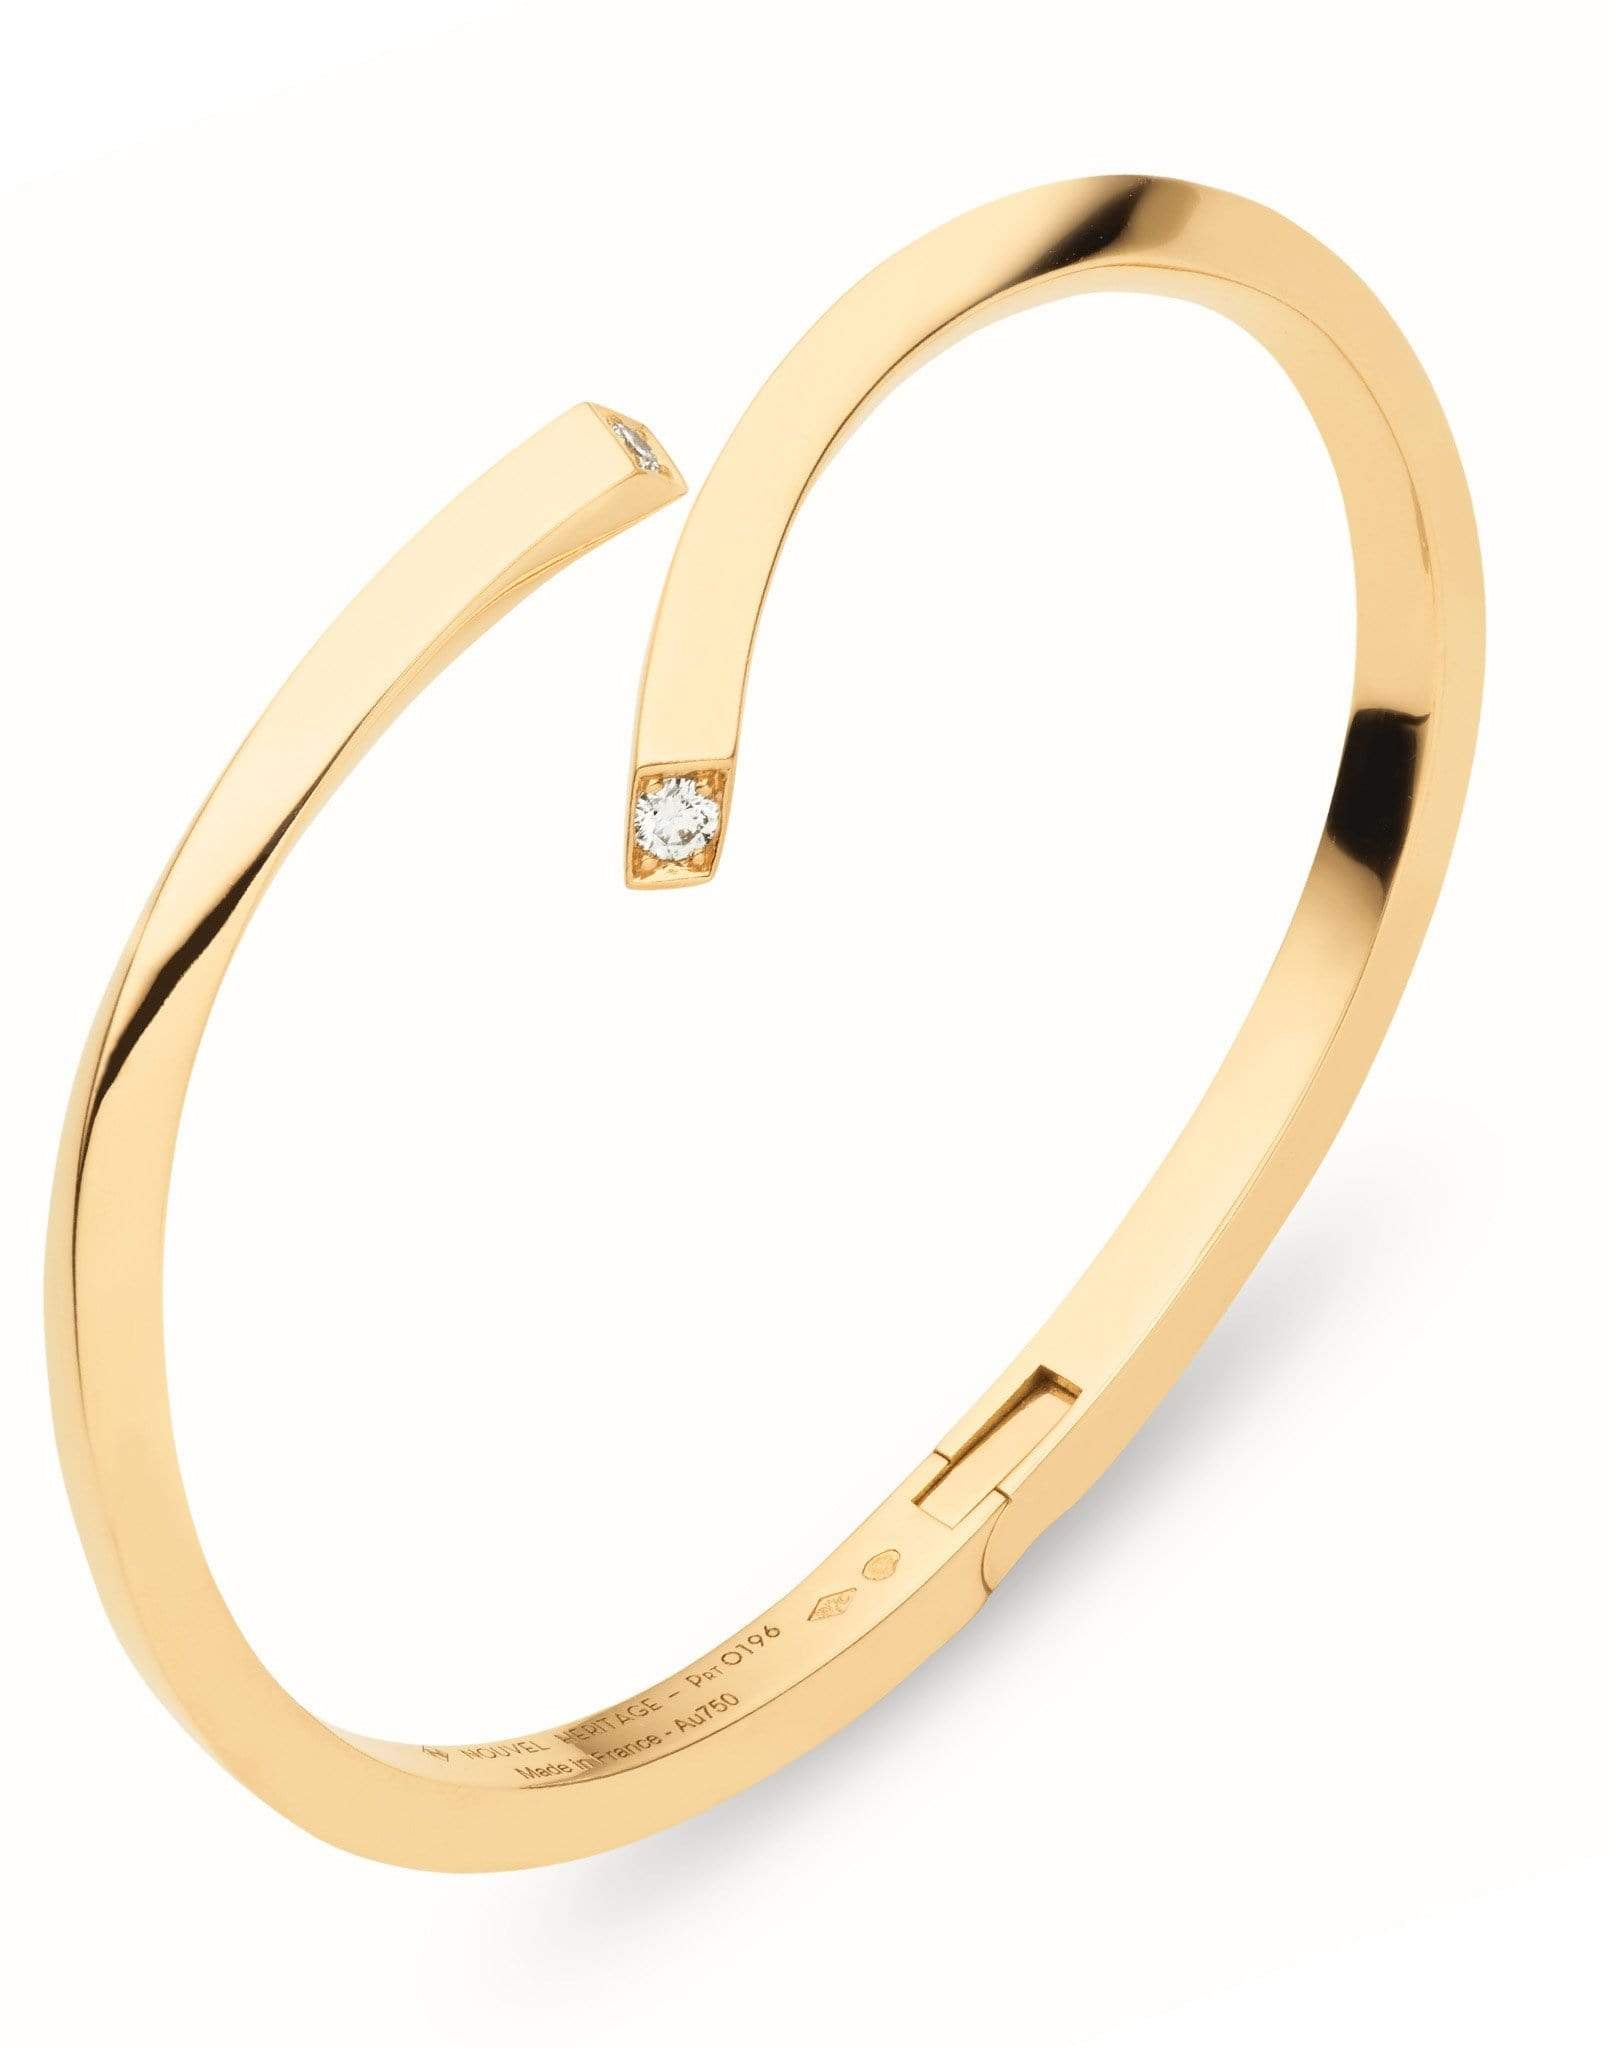 NOUVEL HERITAGE-Gold Thread Bangle-YELLOW GOLD